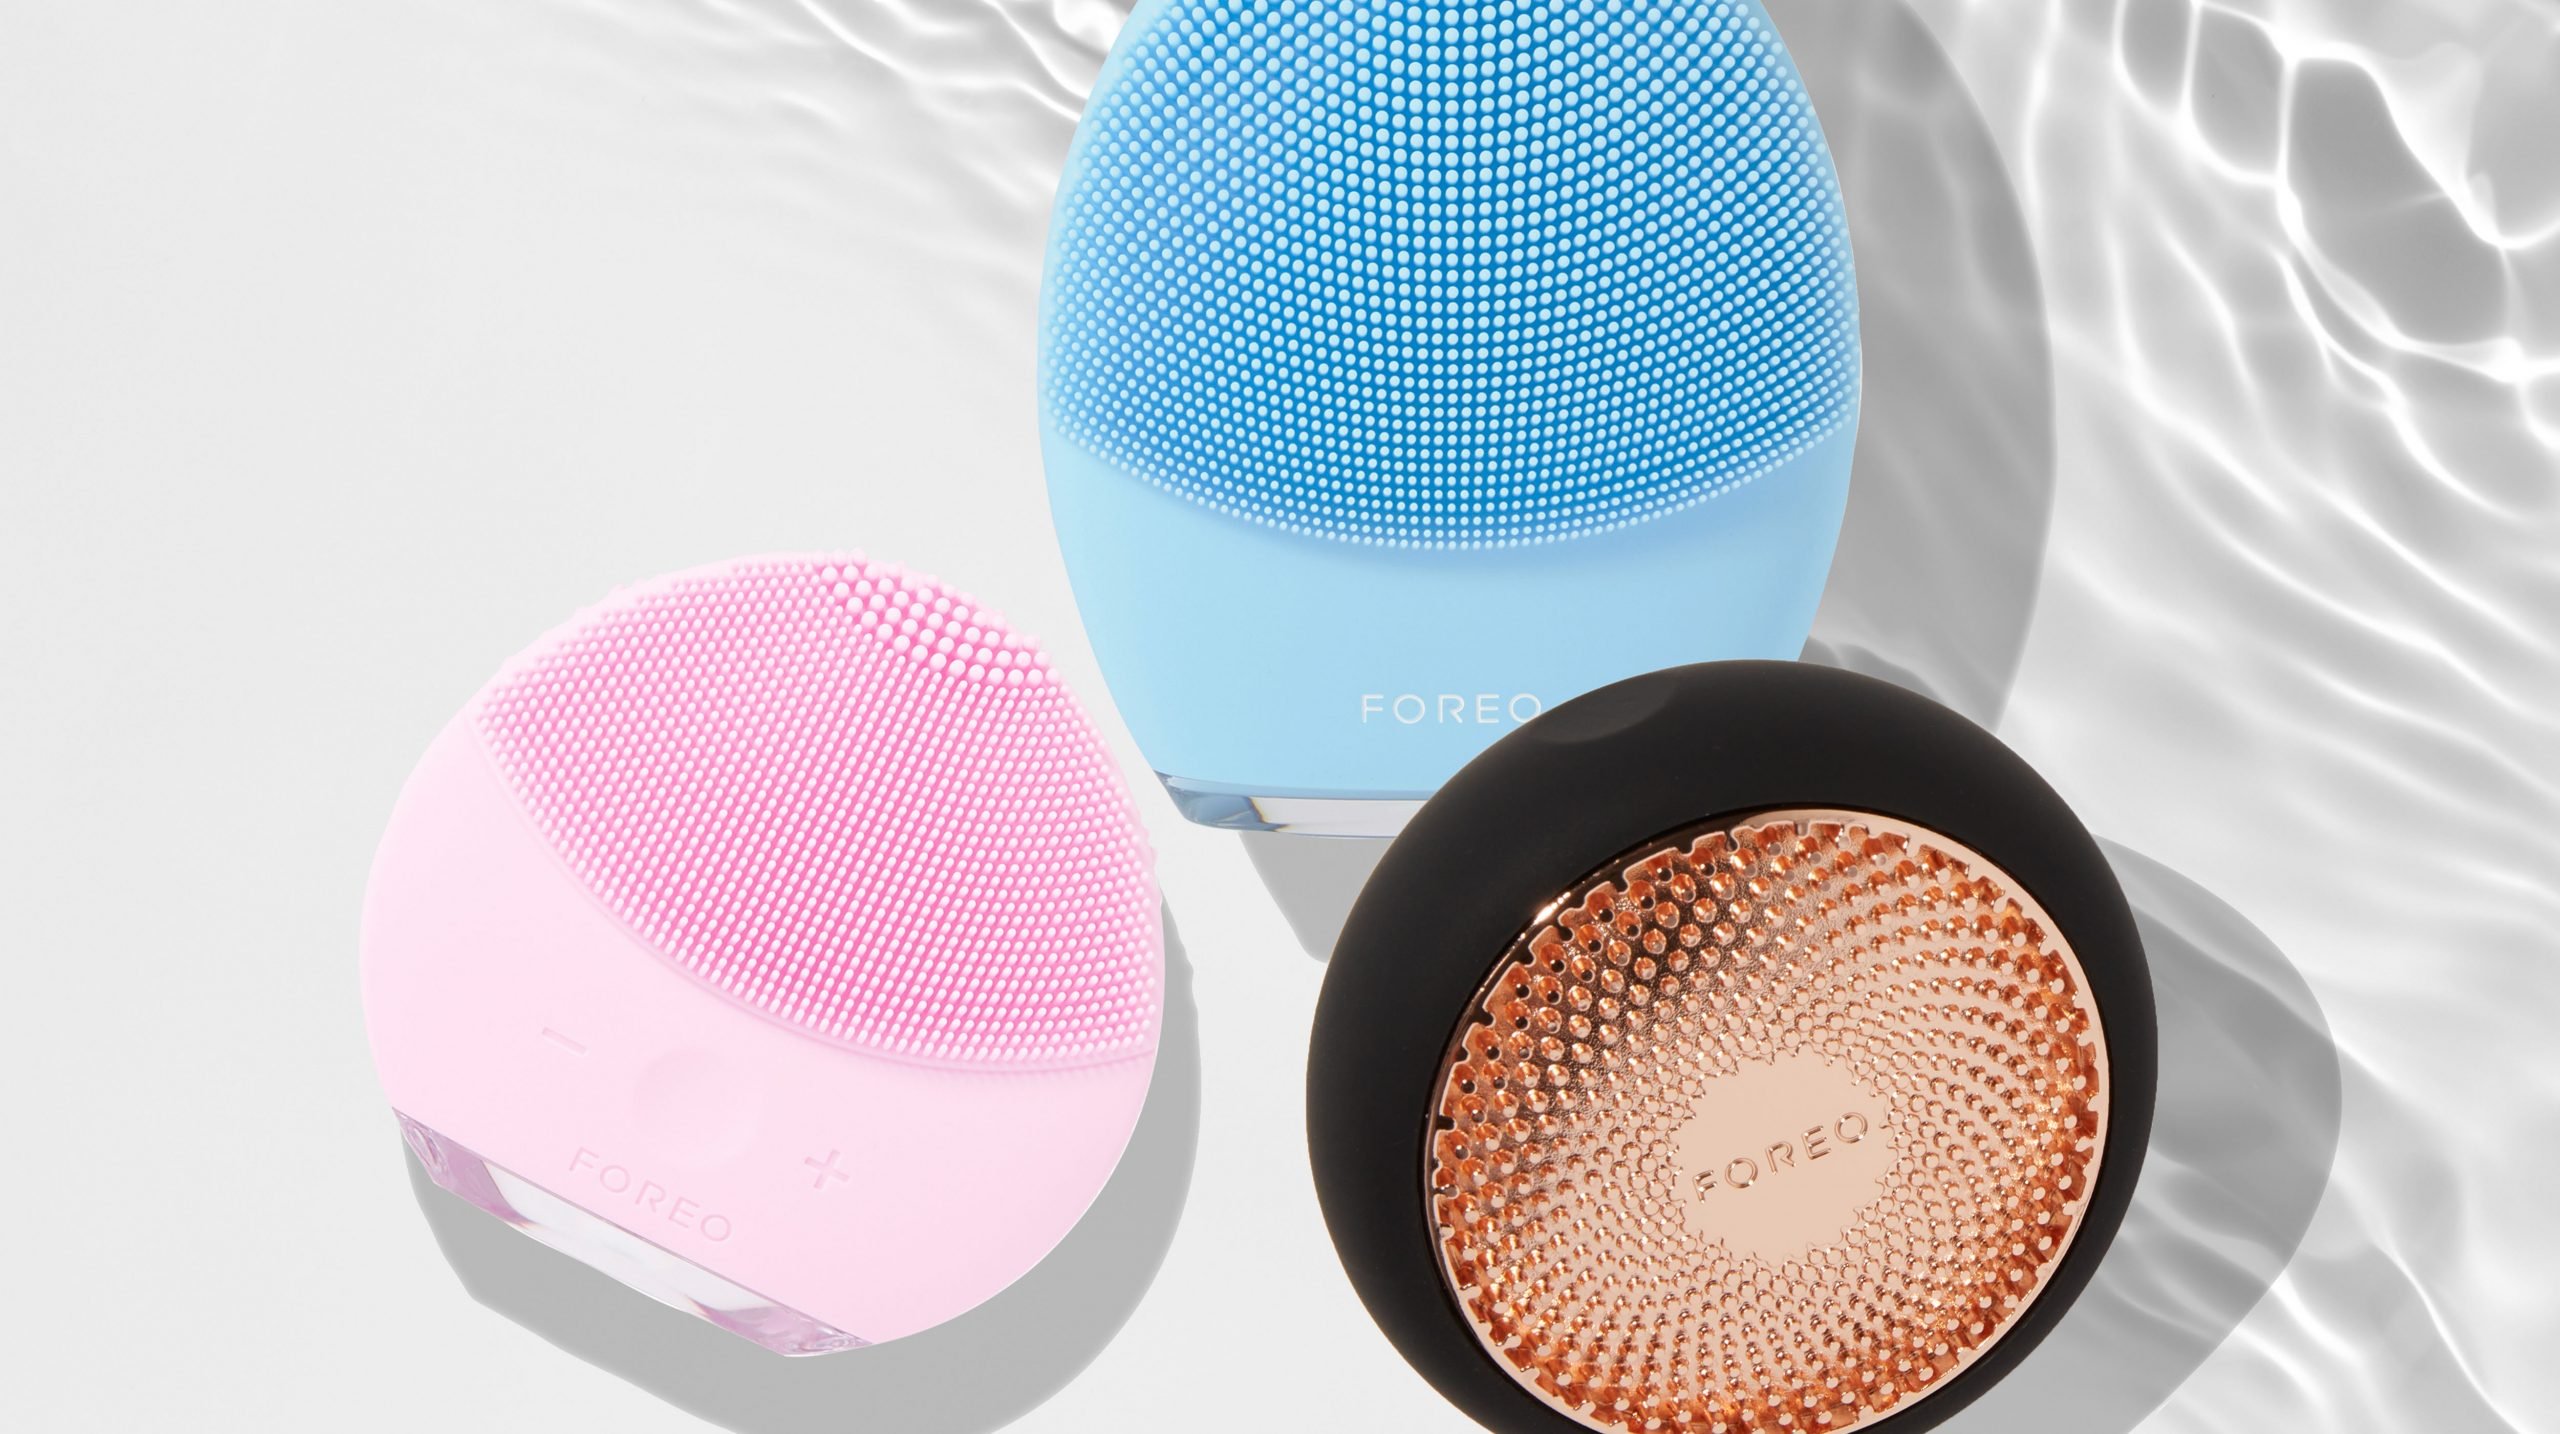 How to choose which FOREO is right for me?